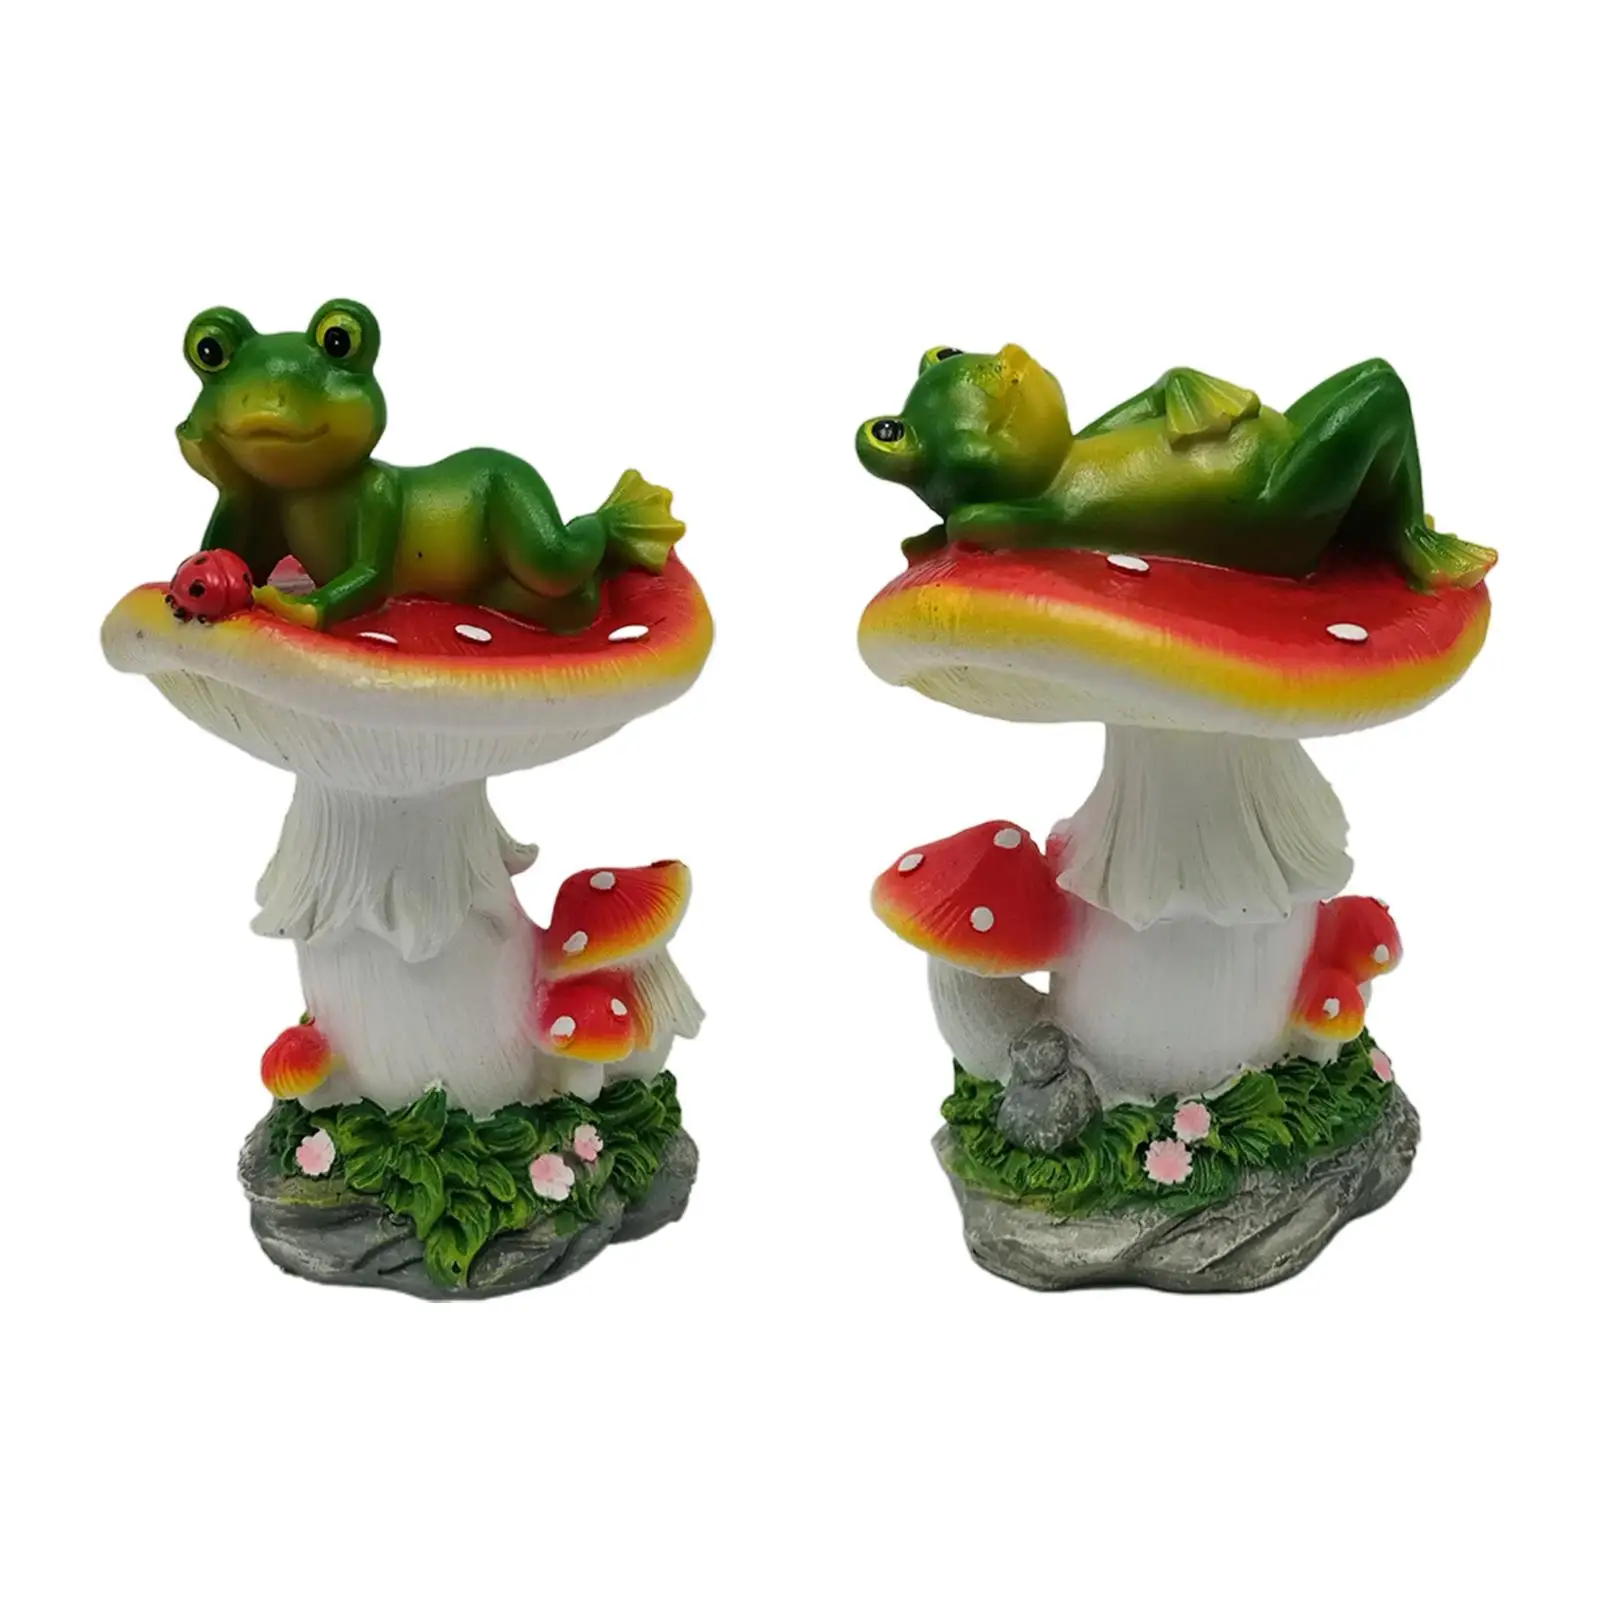 Adorable Frogs Sculpture Novelty Collectibles Frog Statues Frog Laying on for Shelf Home Accent Outside Porch Yard